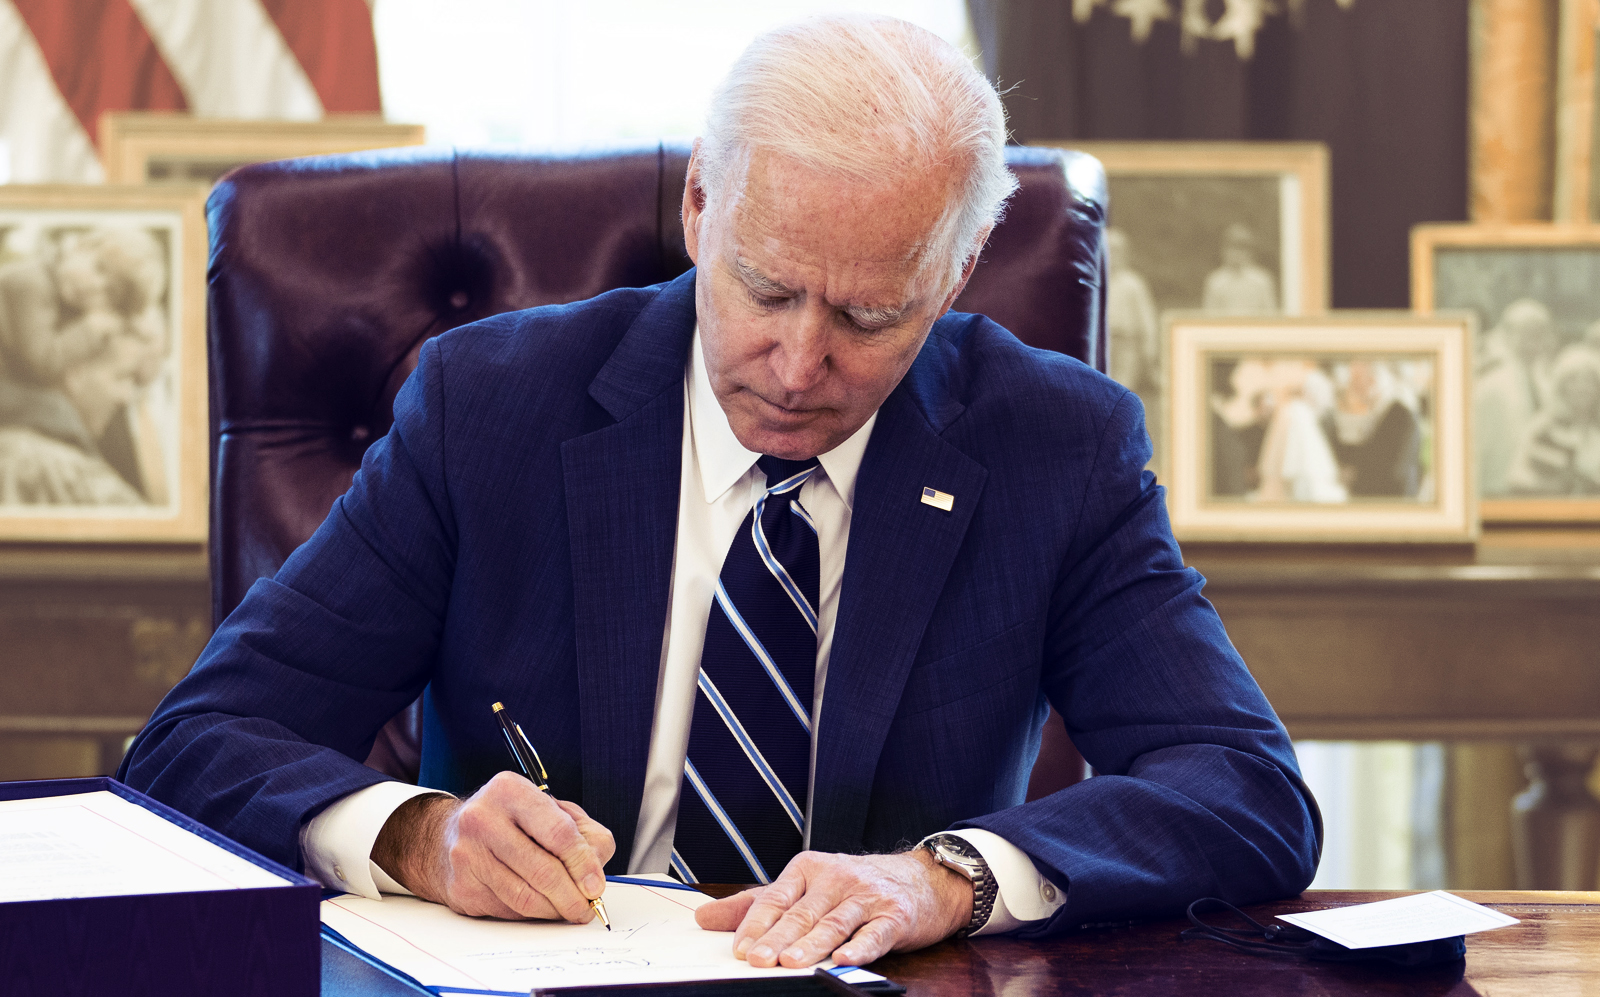 President Biden signing the $1.9 trillion COVID relief bill on March 11. (Getty)